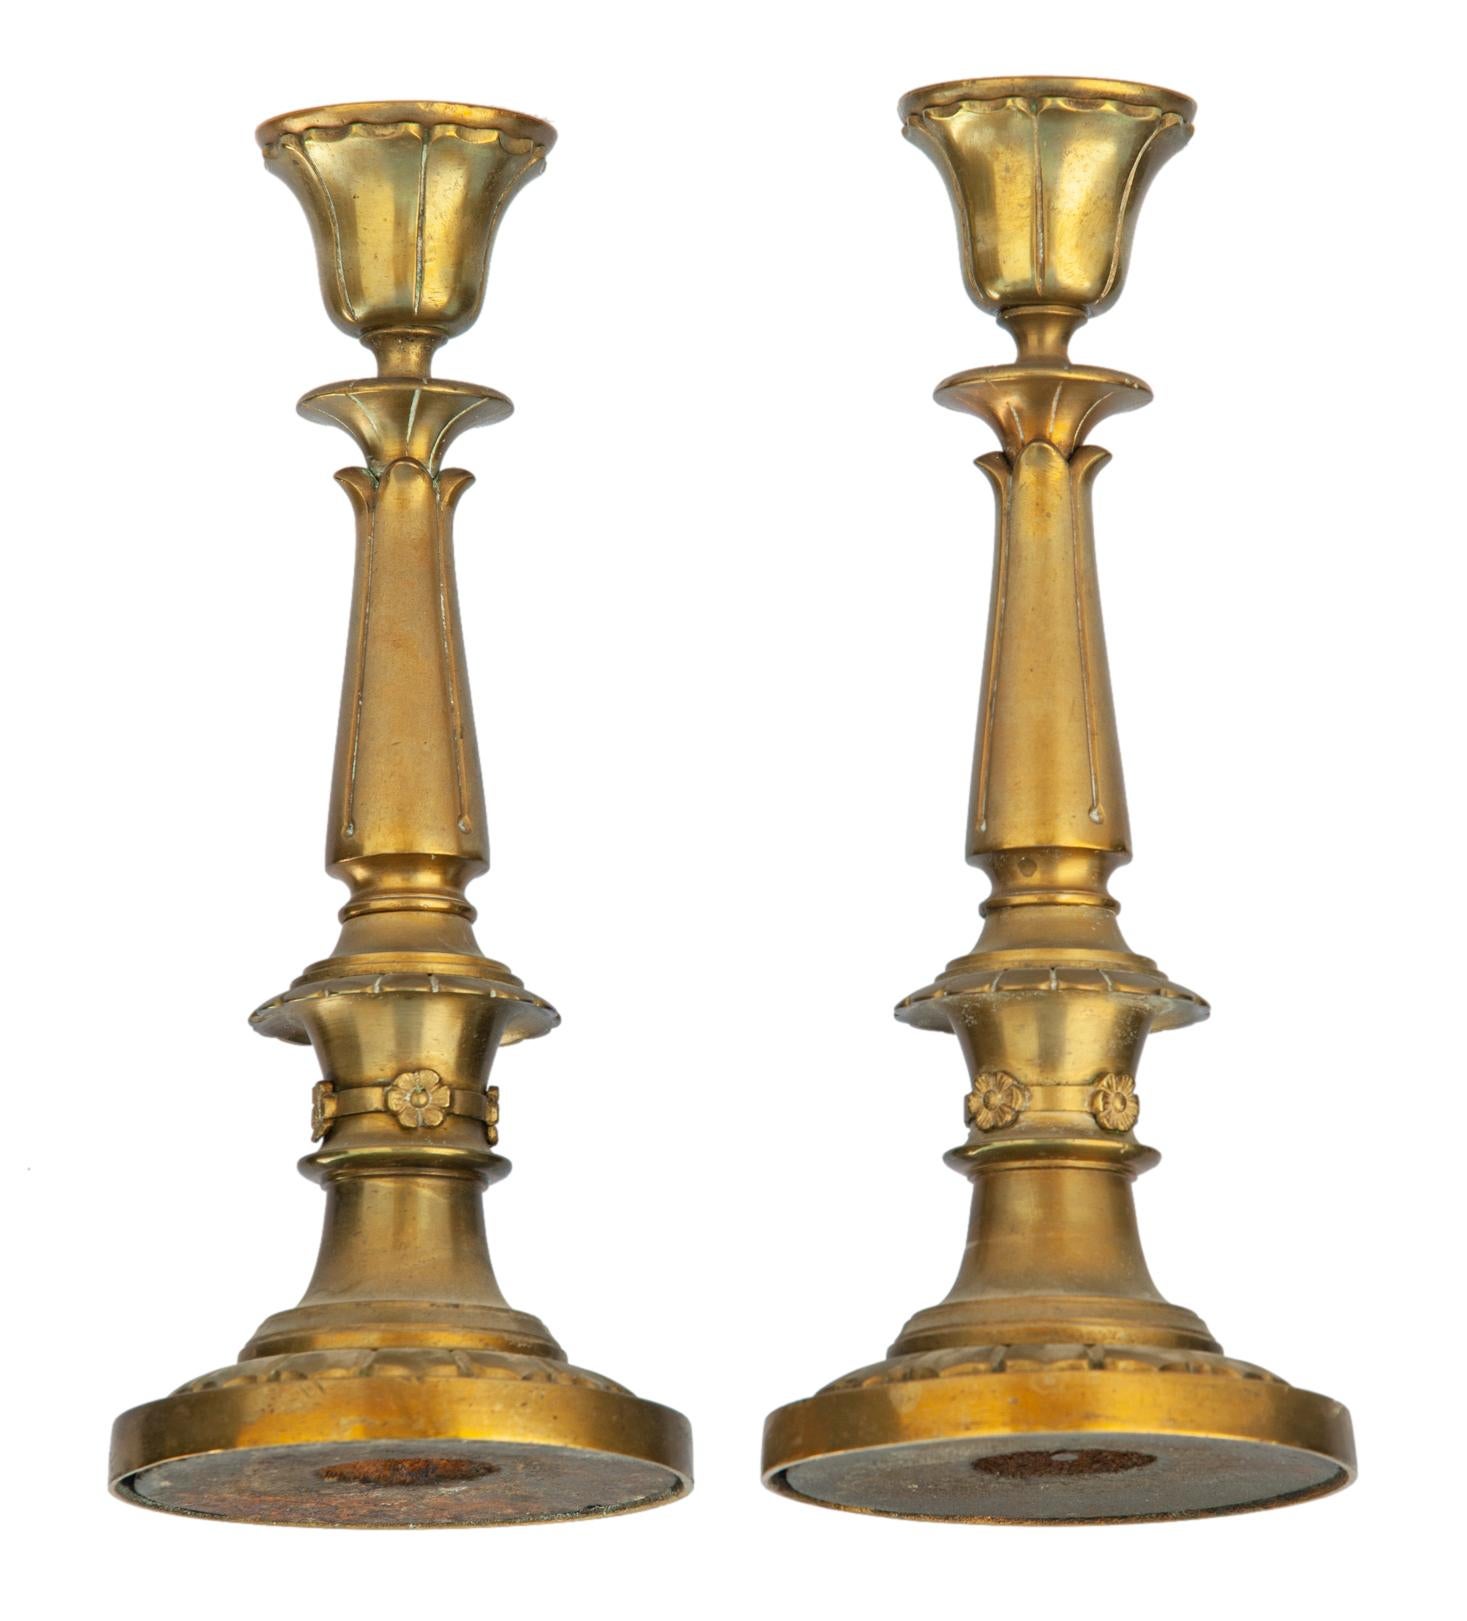 Antique Heavy French Brass Empire Candlesticks, a pair In Good Condition For Sale In Malibu, CA